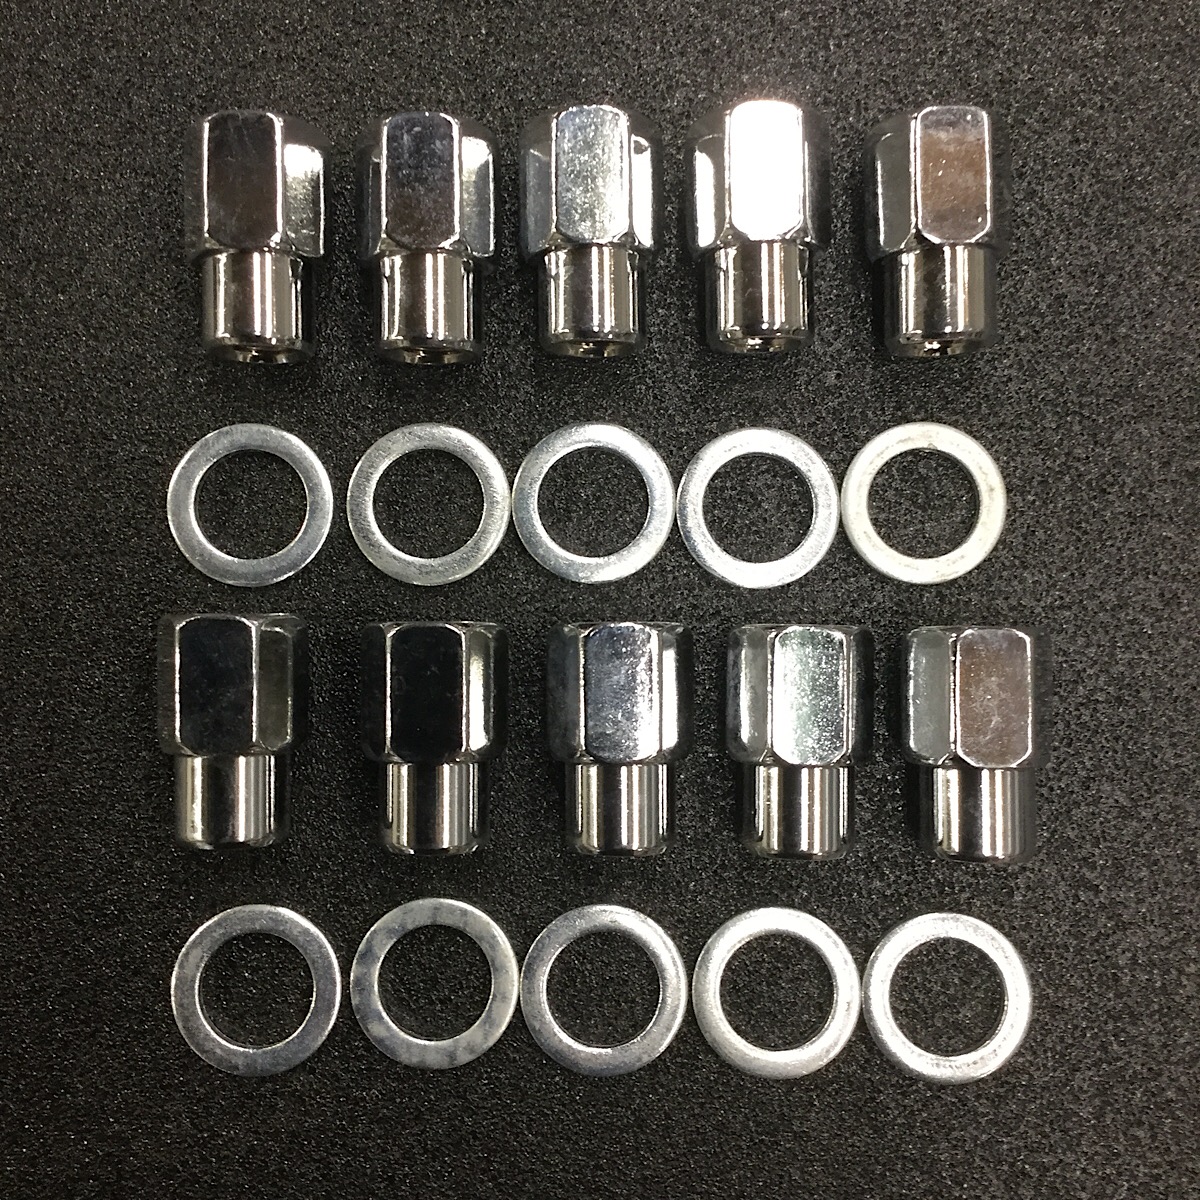 Weld 12 mm x 1.5 RH Open End Lug Nuts w/ Centered Washers